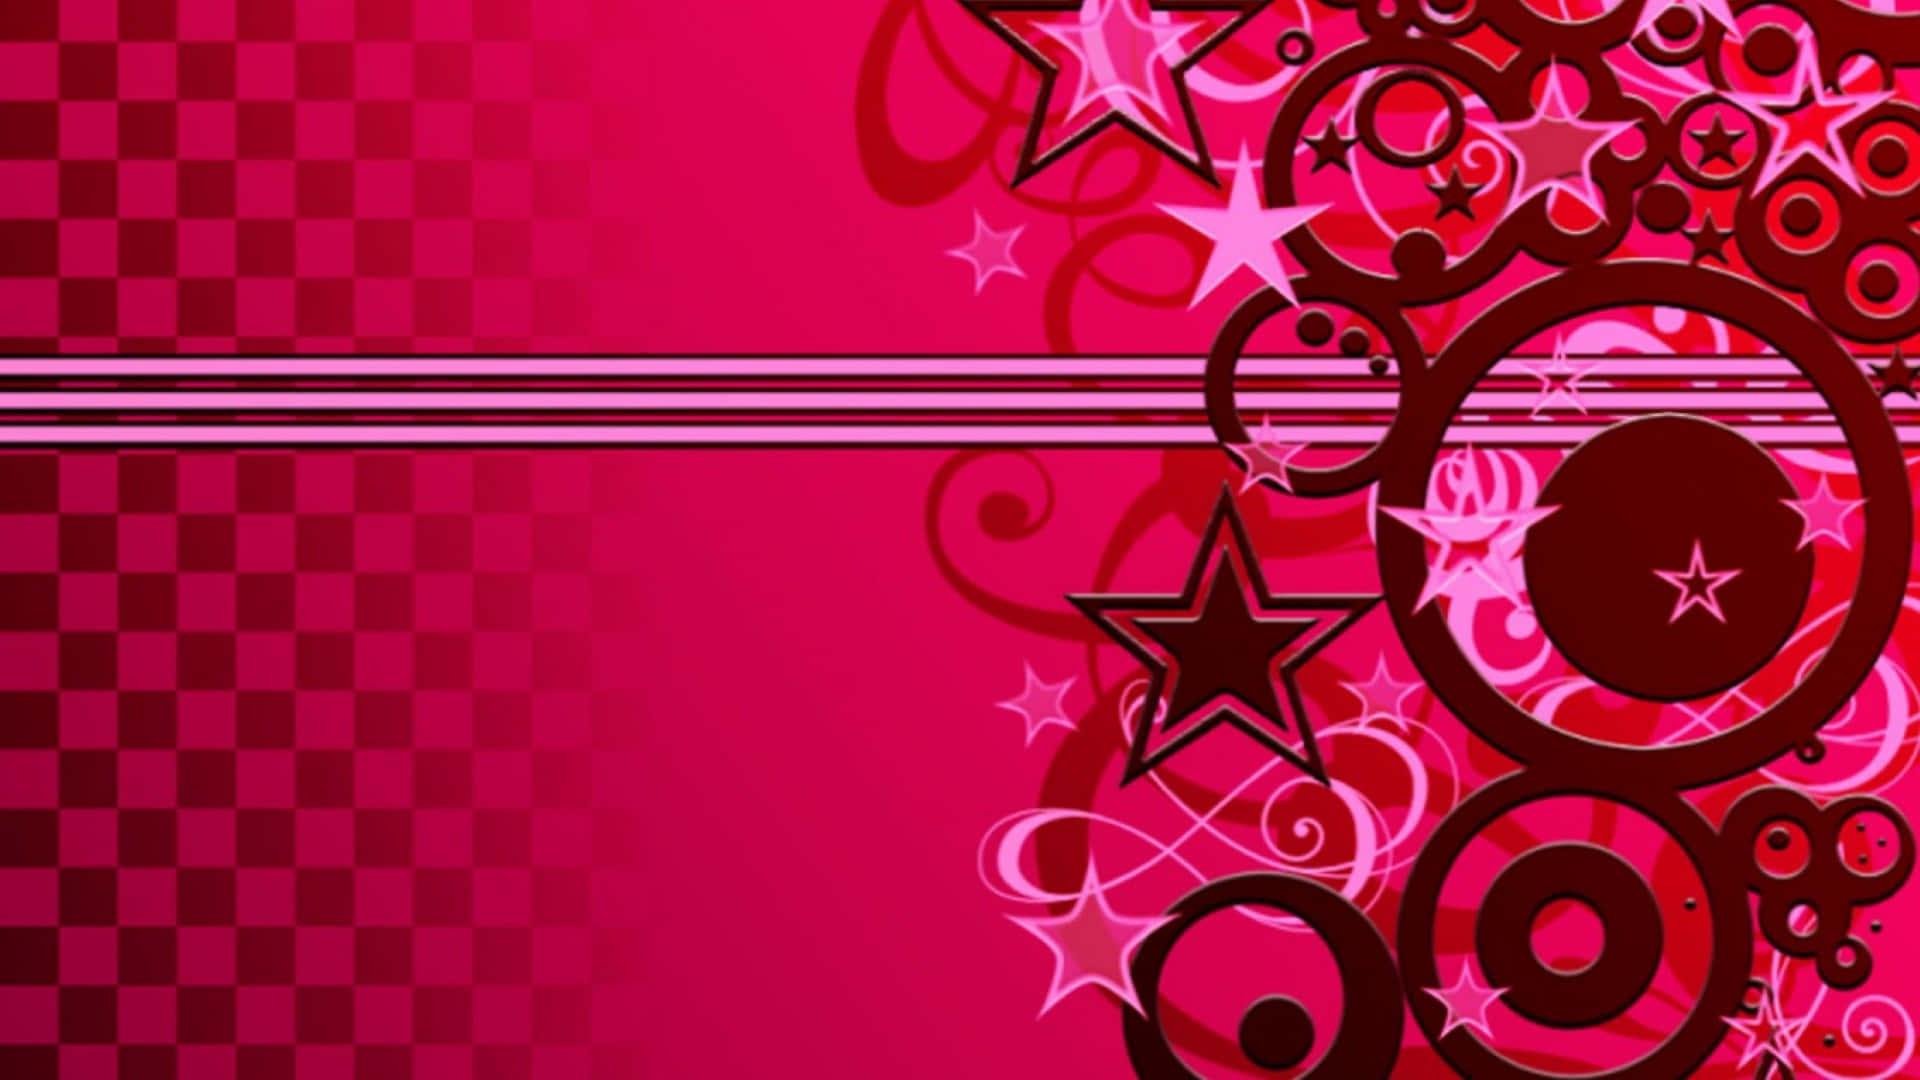 A Pink Background With Stars And Swirls Wallpaper